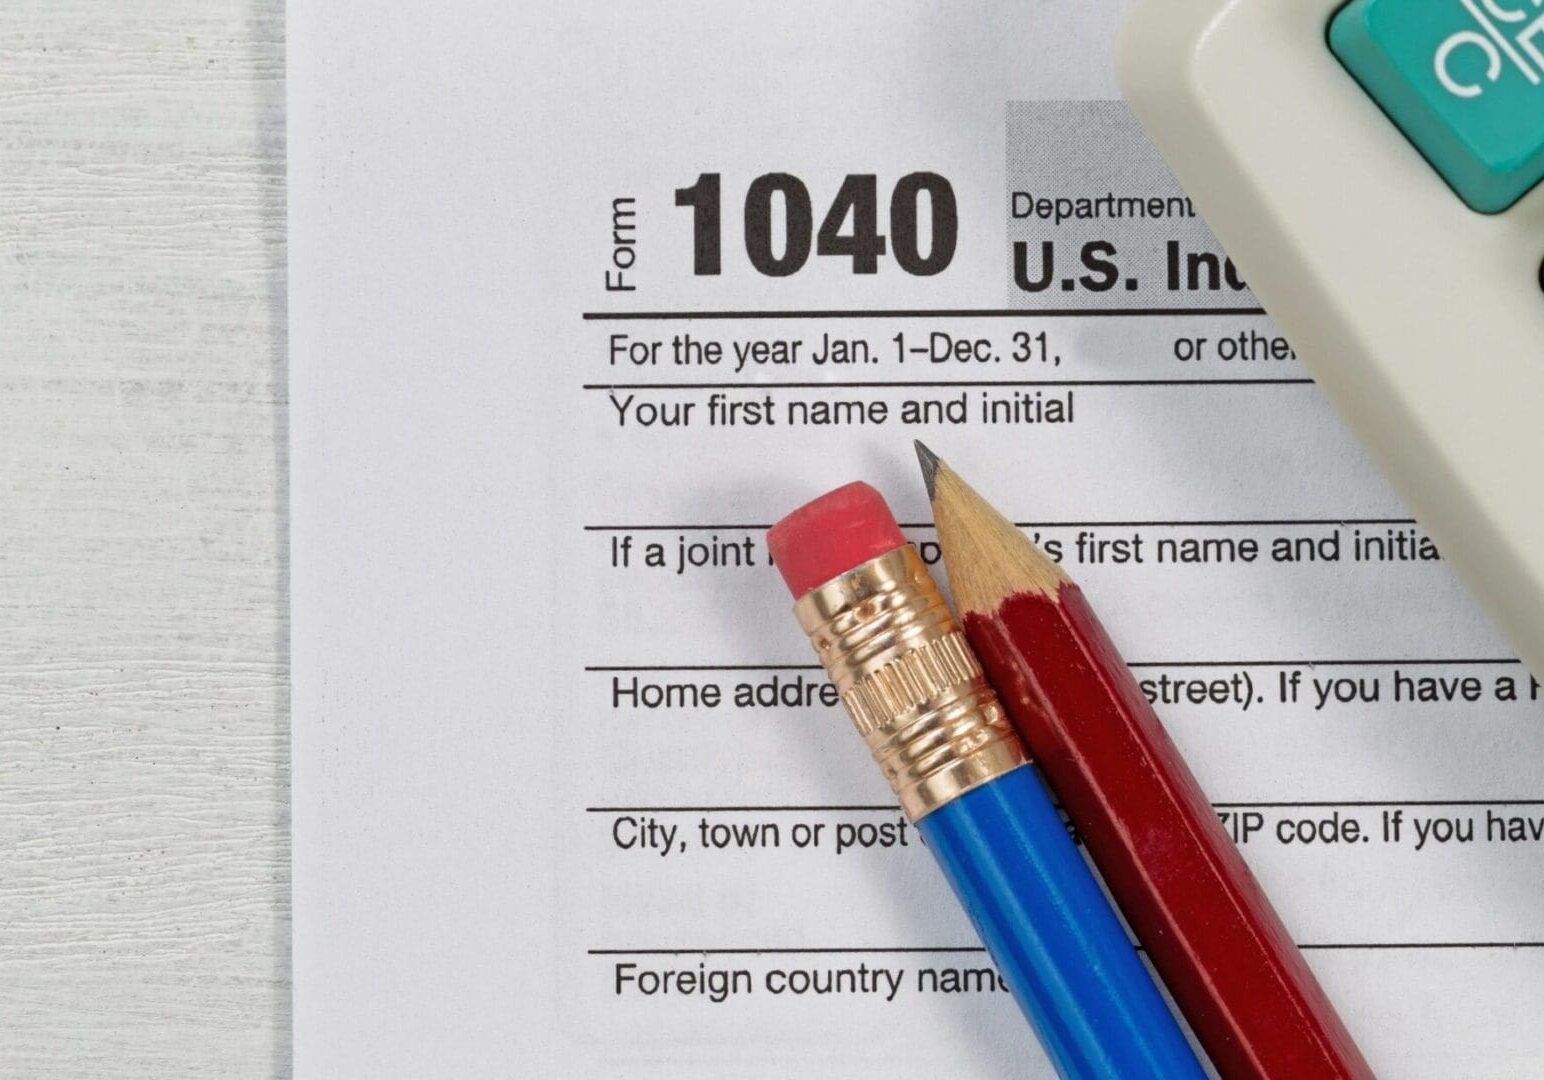 U.s. income tax form 1040 with a pencil and calculator on a desk, emphasizing the section for personal information.